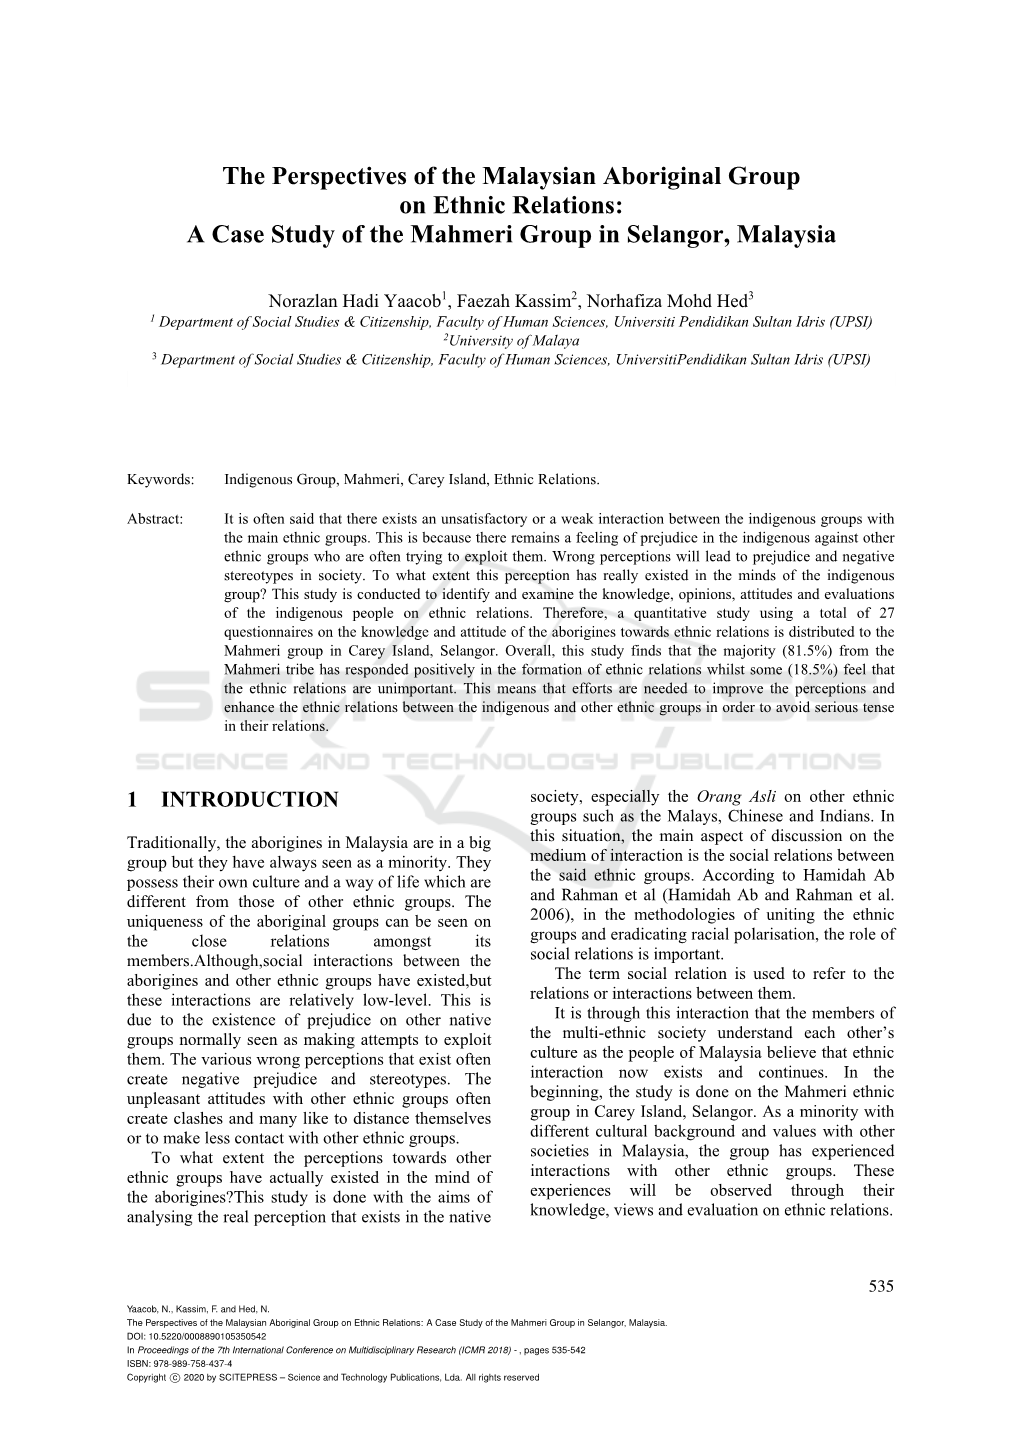 A Case Study of the Mahmeri Group in Selangor, Malaysia